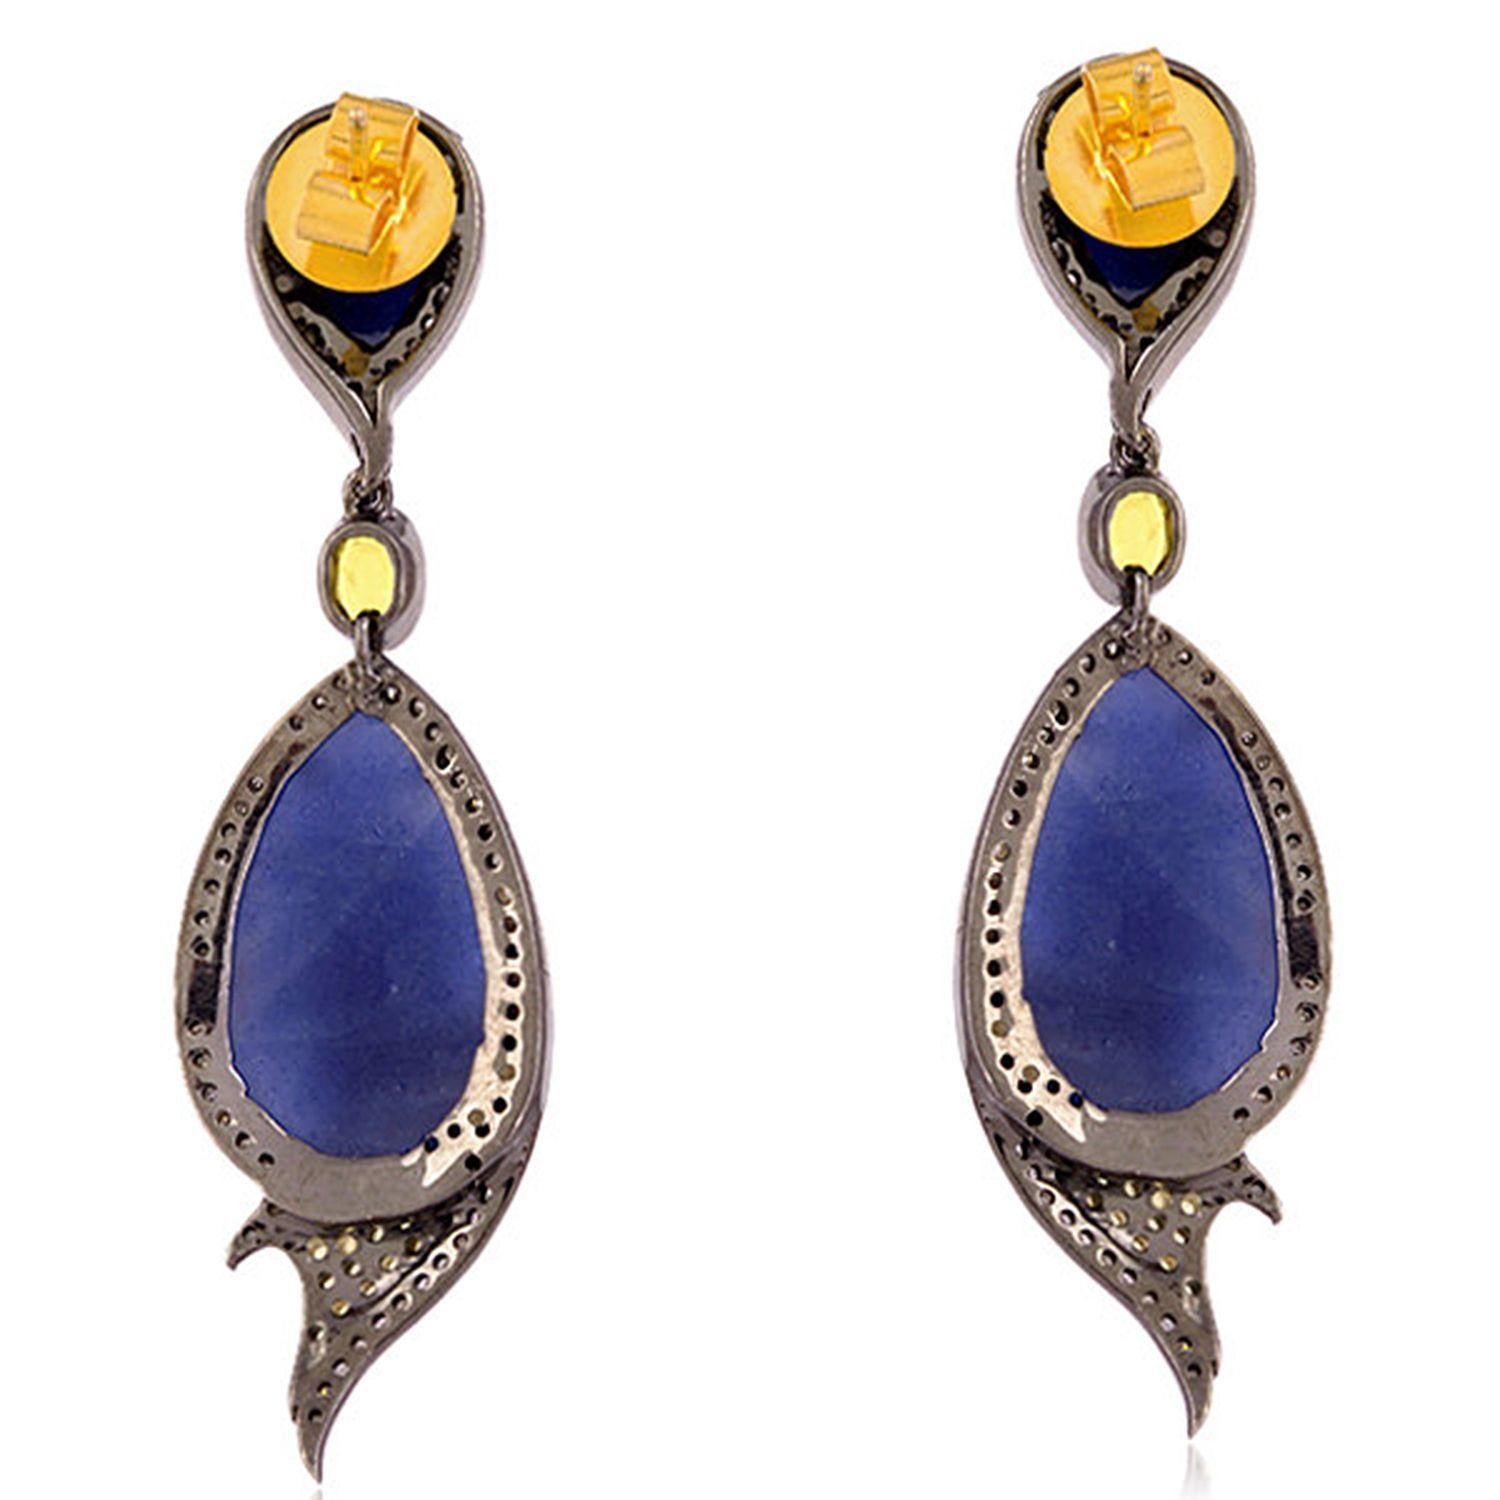 Cast in 18-karat gold and sterling silver. These beautiful earrings are hand set in 24.27 carats blue sapphire and 1.29 carats of sparkling diamonds. 

FOLLOW  MEGHNA JEWELS storefront to view the latest collection & exclusive pieces.  Meghna Jewels